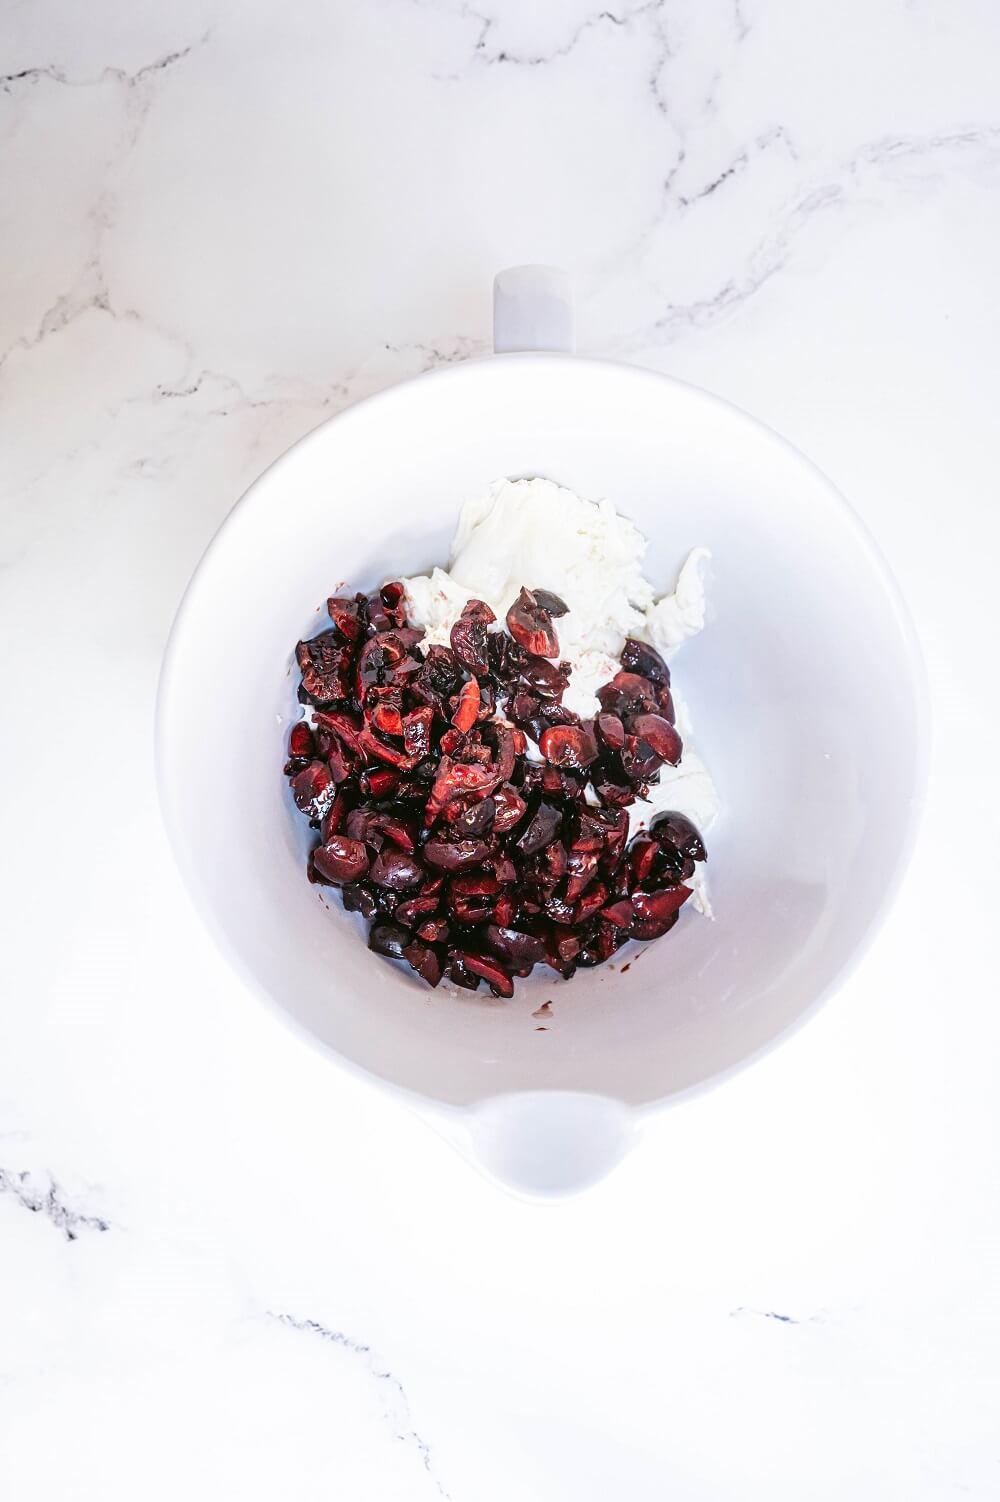 Combine the cherries and goat cheese...